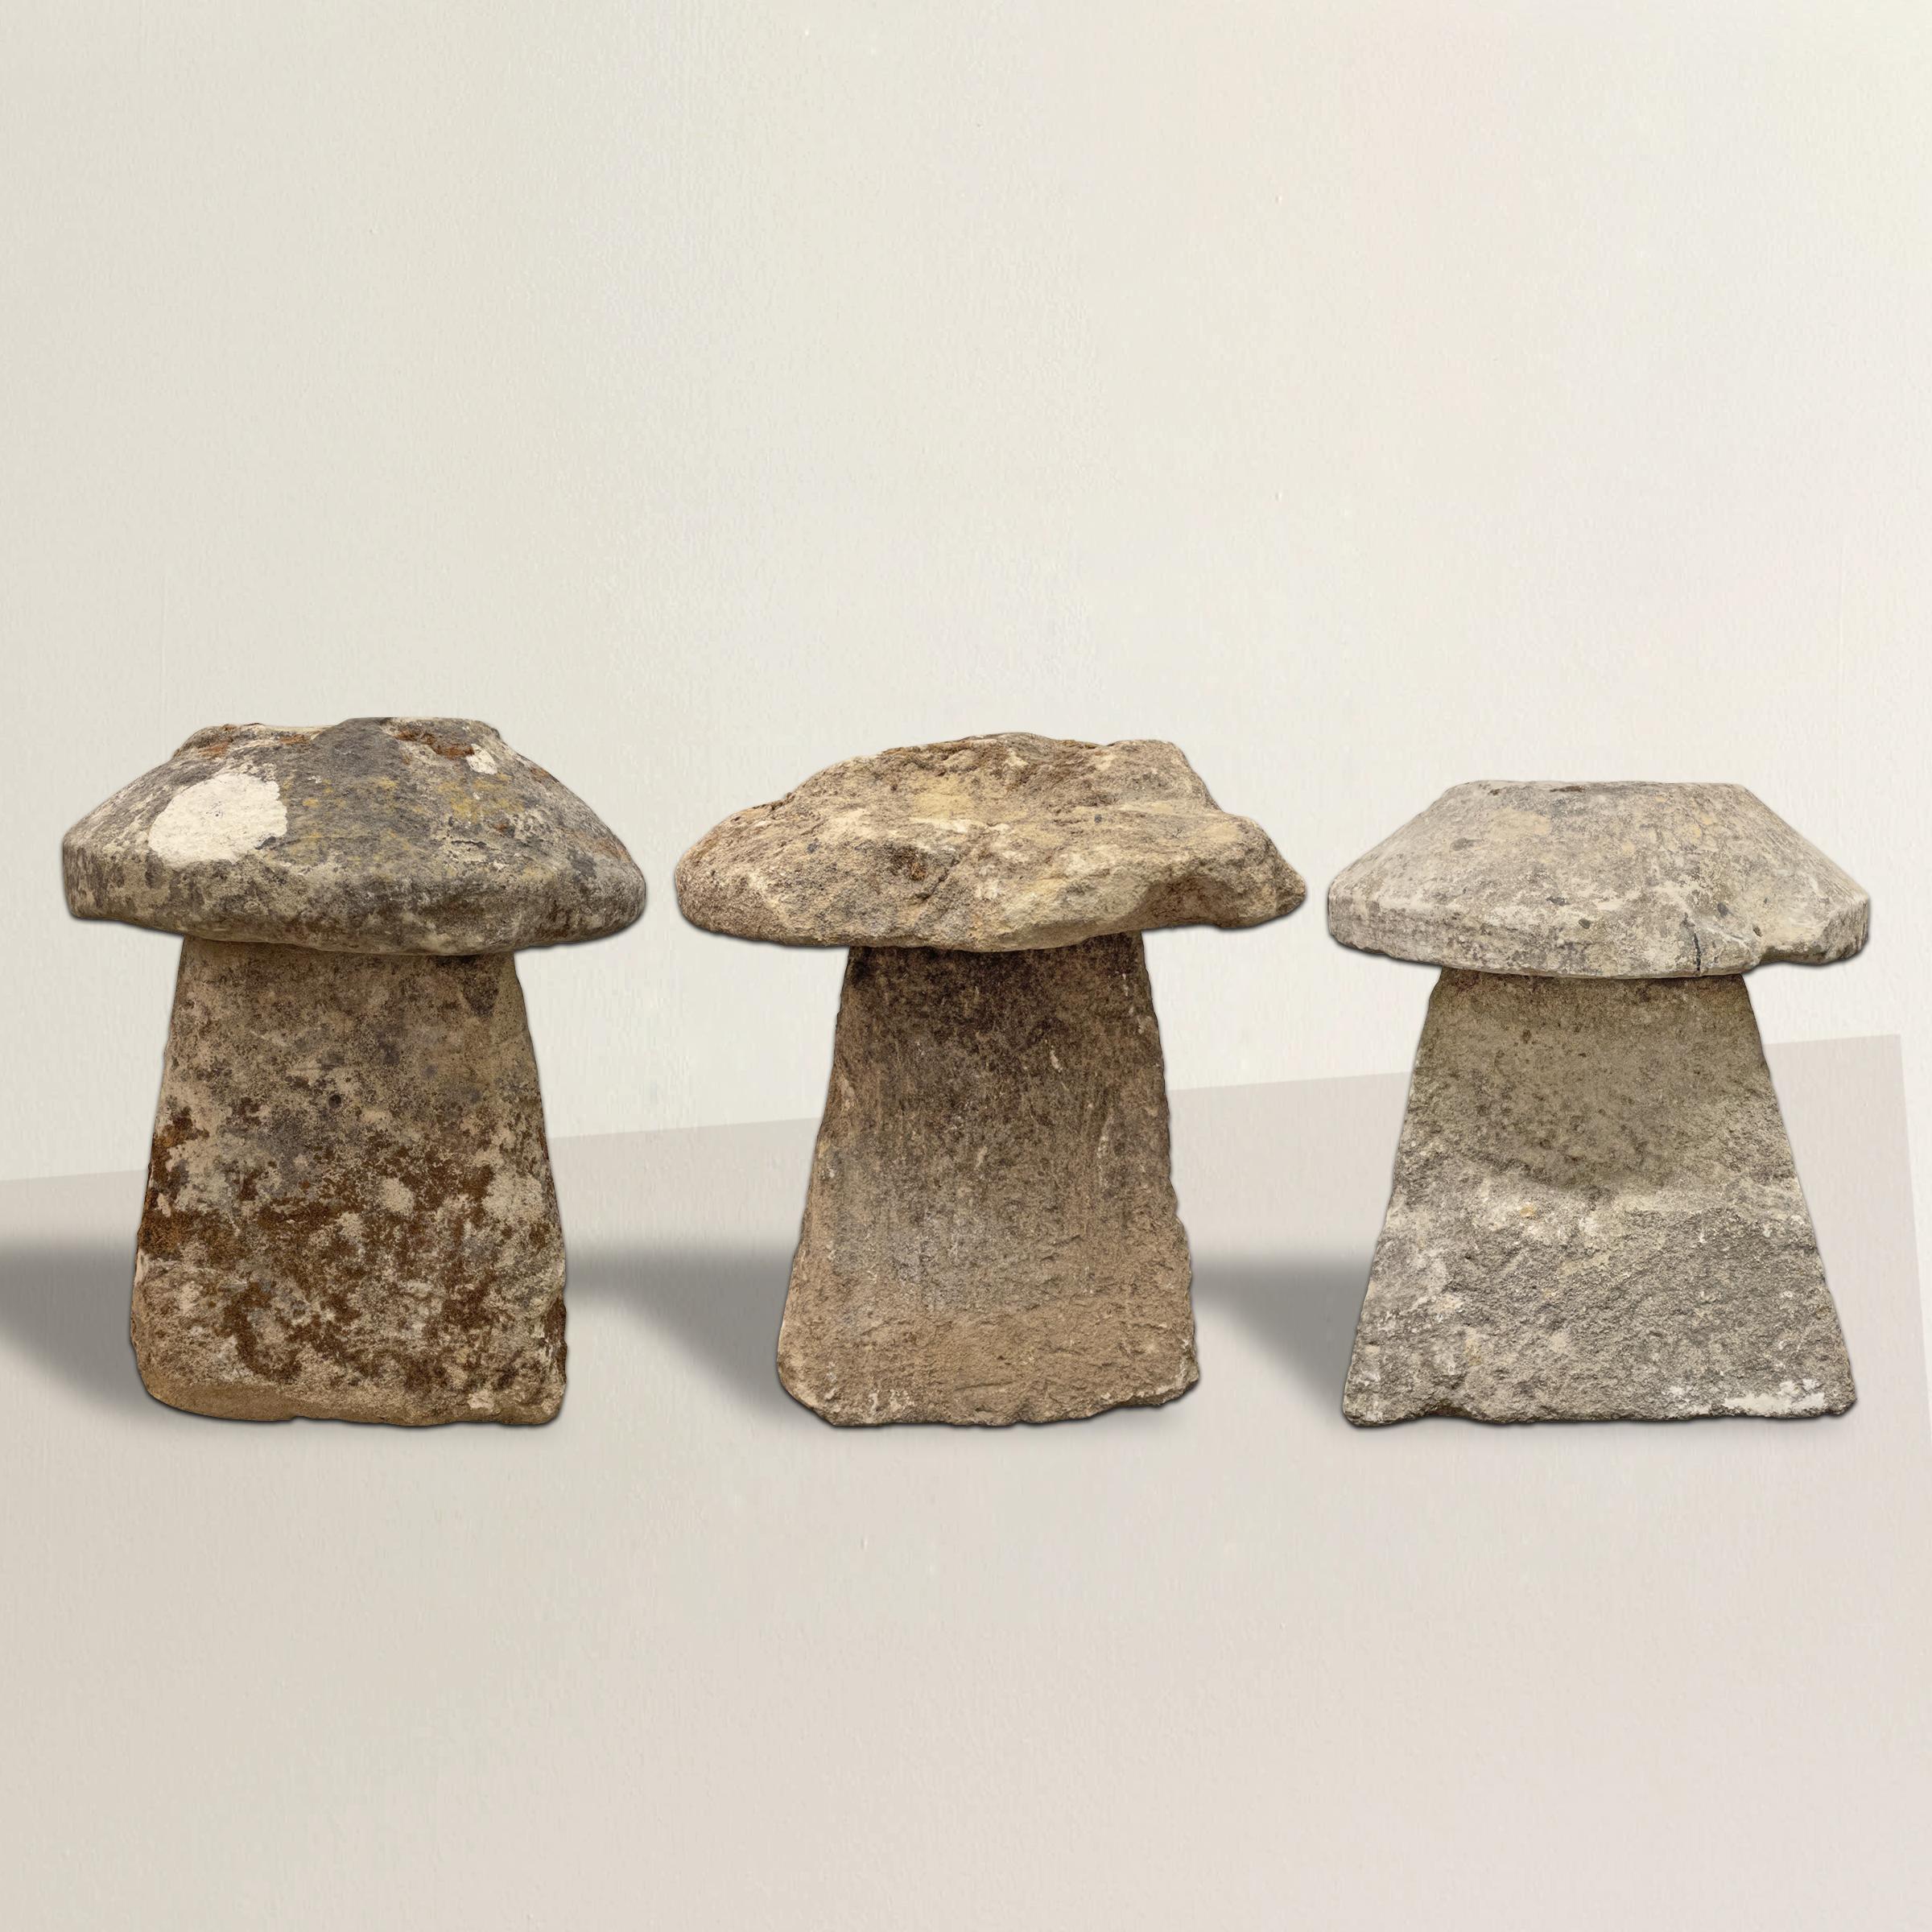 A wonderful set of three 18th century English carved limestone staddle stones with the most wonderful aged surfaces, natural lichens, and wear that only 300 years of use can bestow. Staddle stones were used to elevate granaries off the ground, and